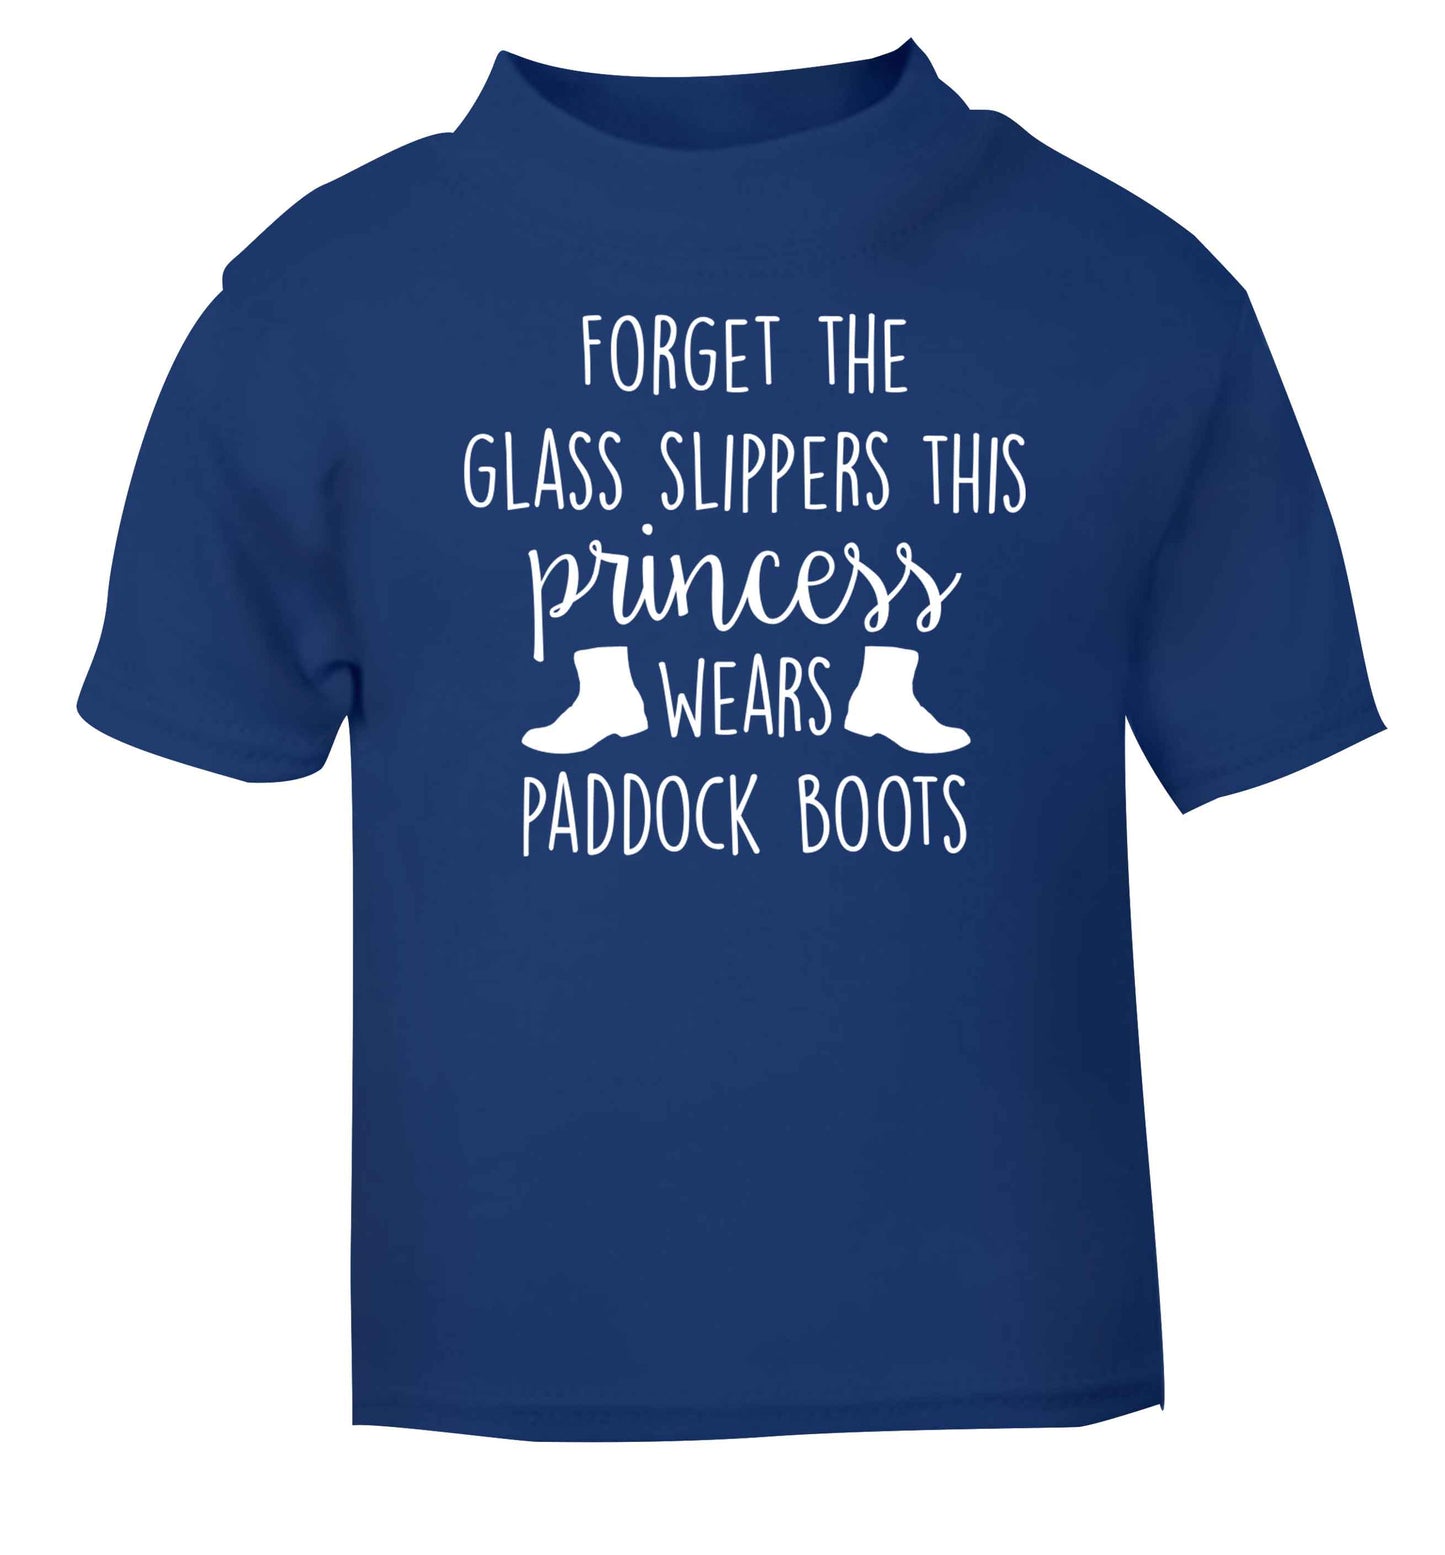 Forget the glass slippers this princess wears paddock boots blue baby toddler Tshirt 2 Years